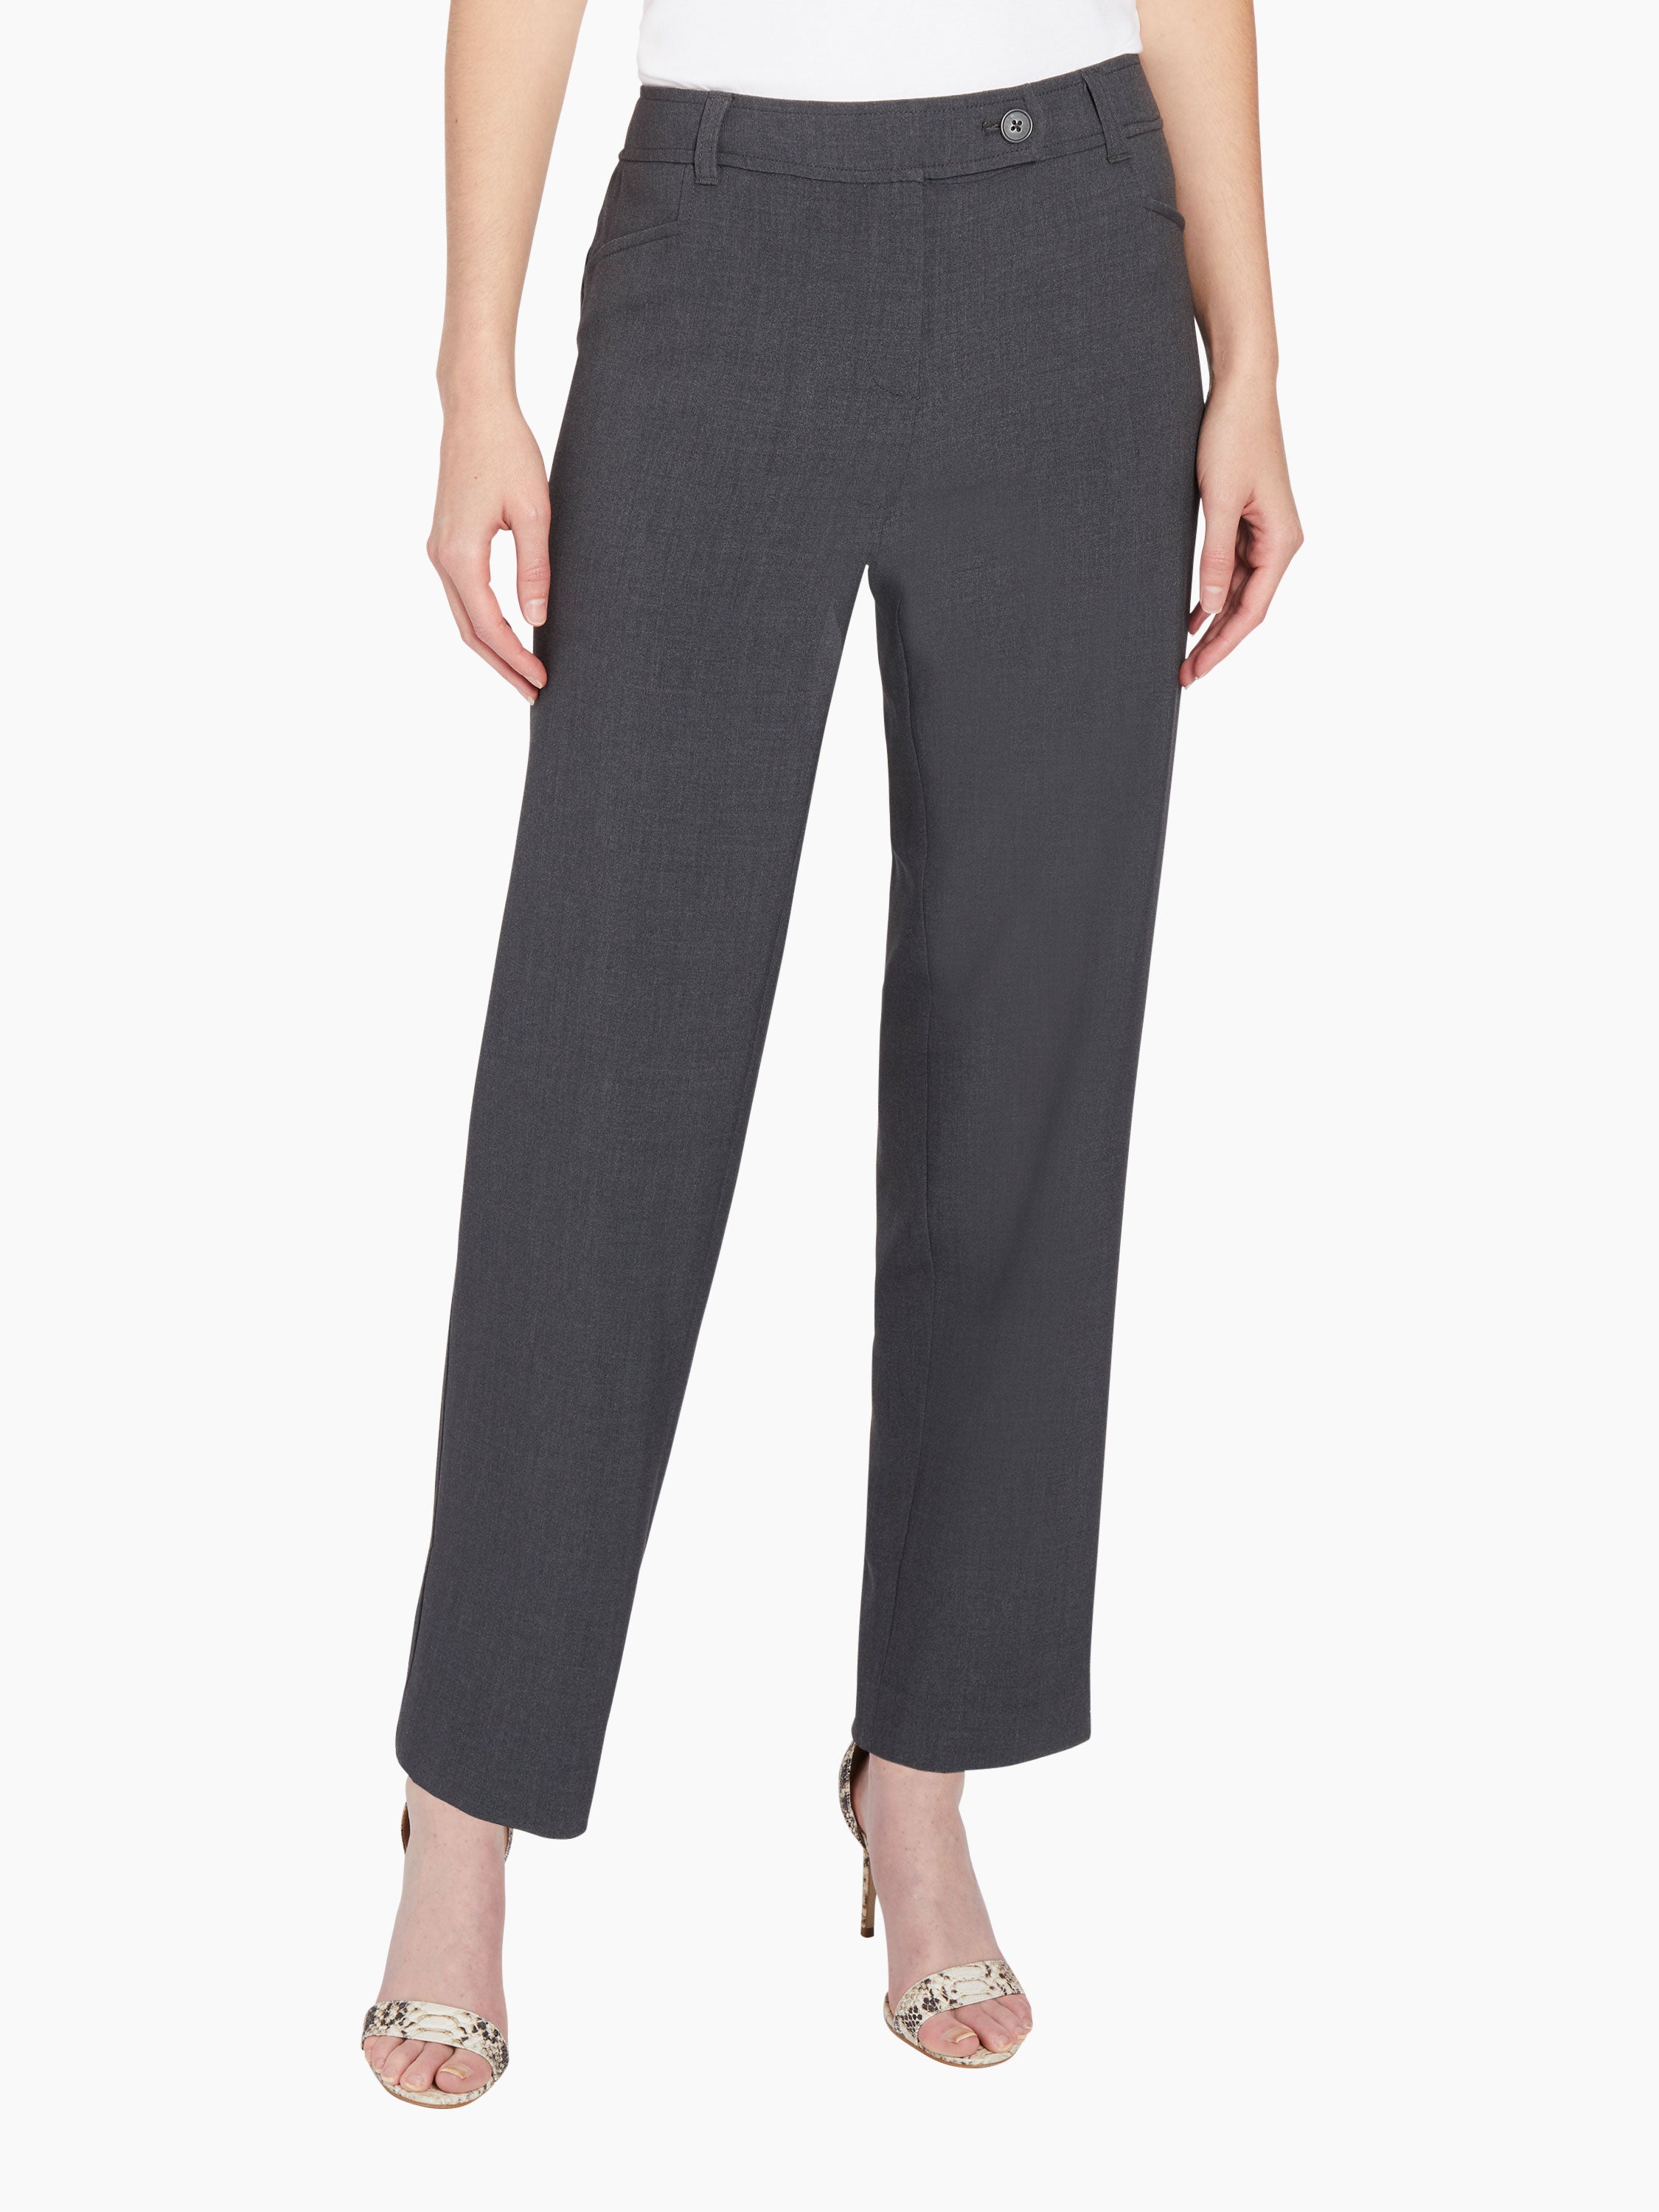  Wrinkle-Free Stretch Dress Pants Plus Size For Women Pull-on  Pant Ease Into Comfort Office Pant Grey XL